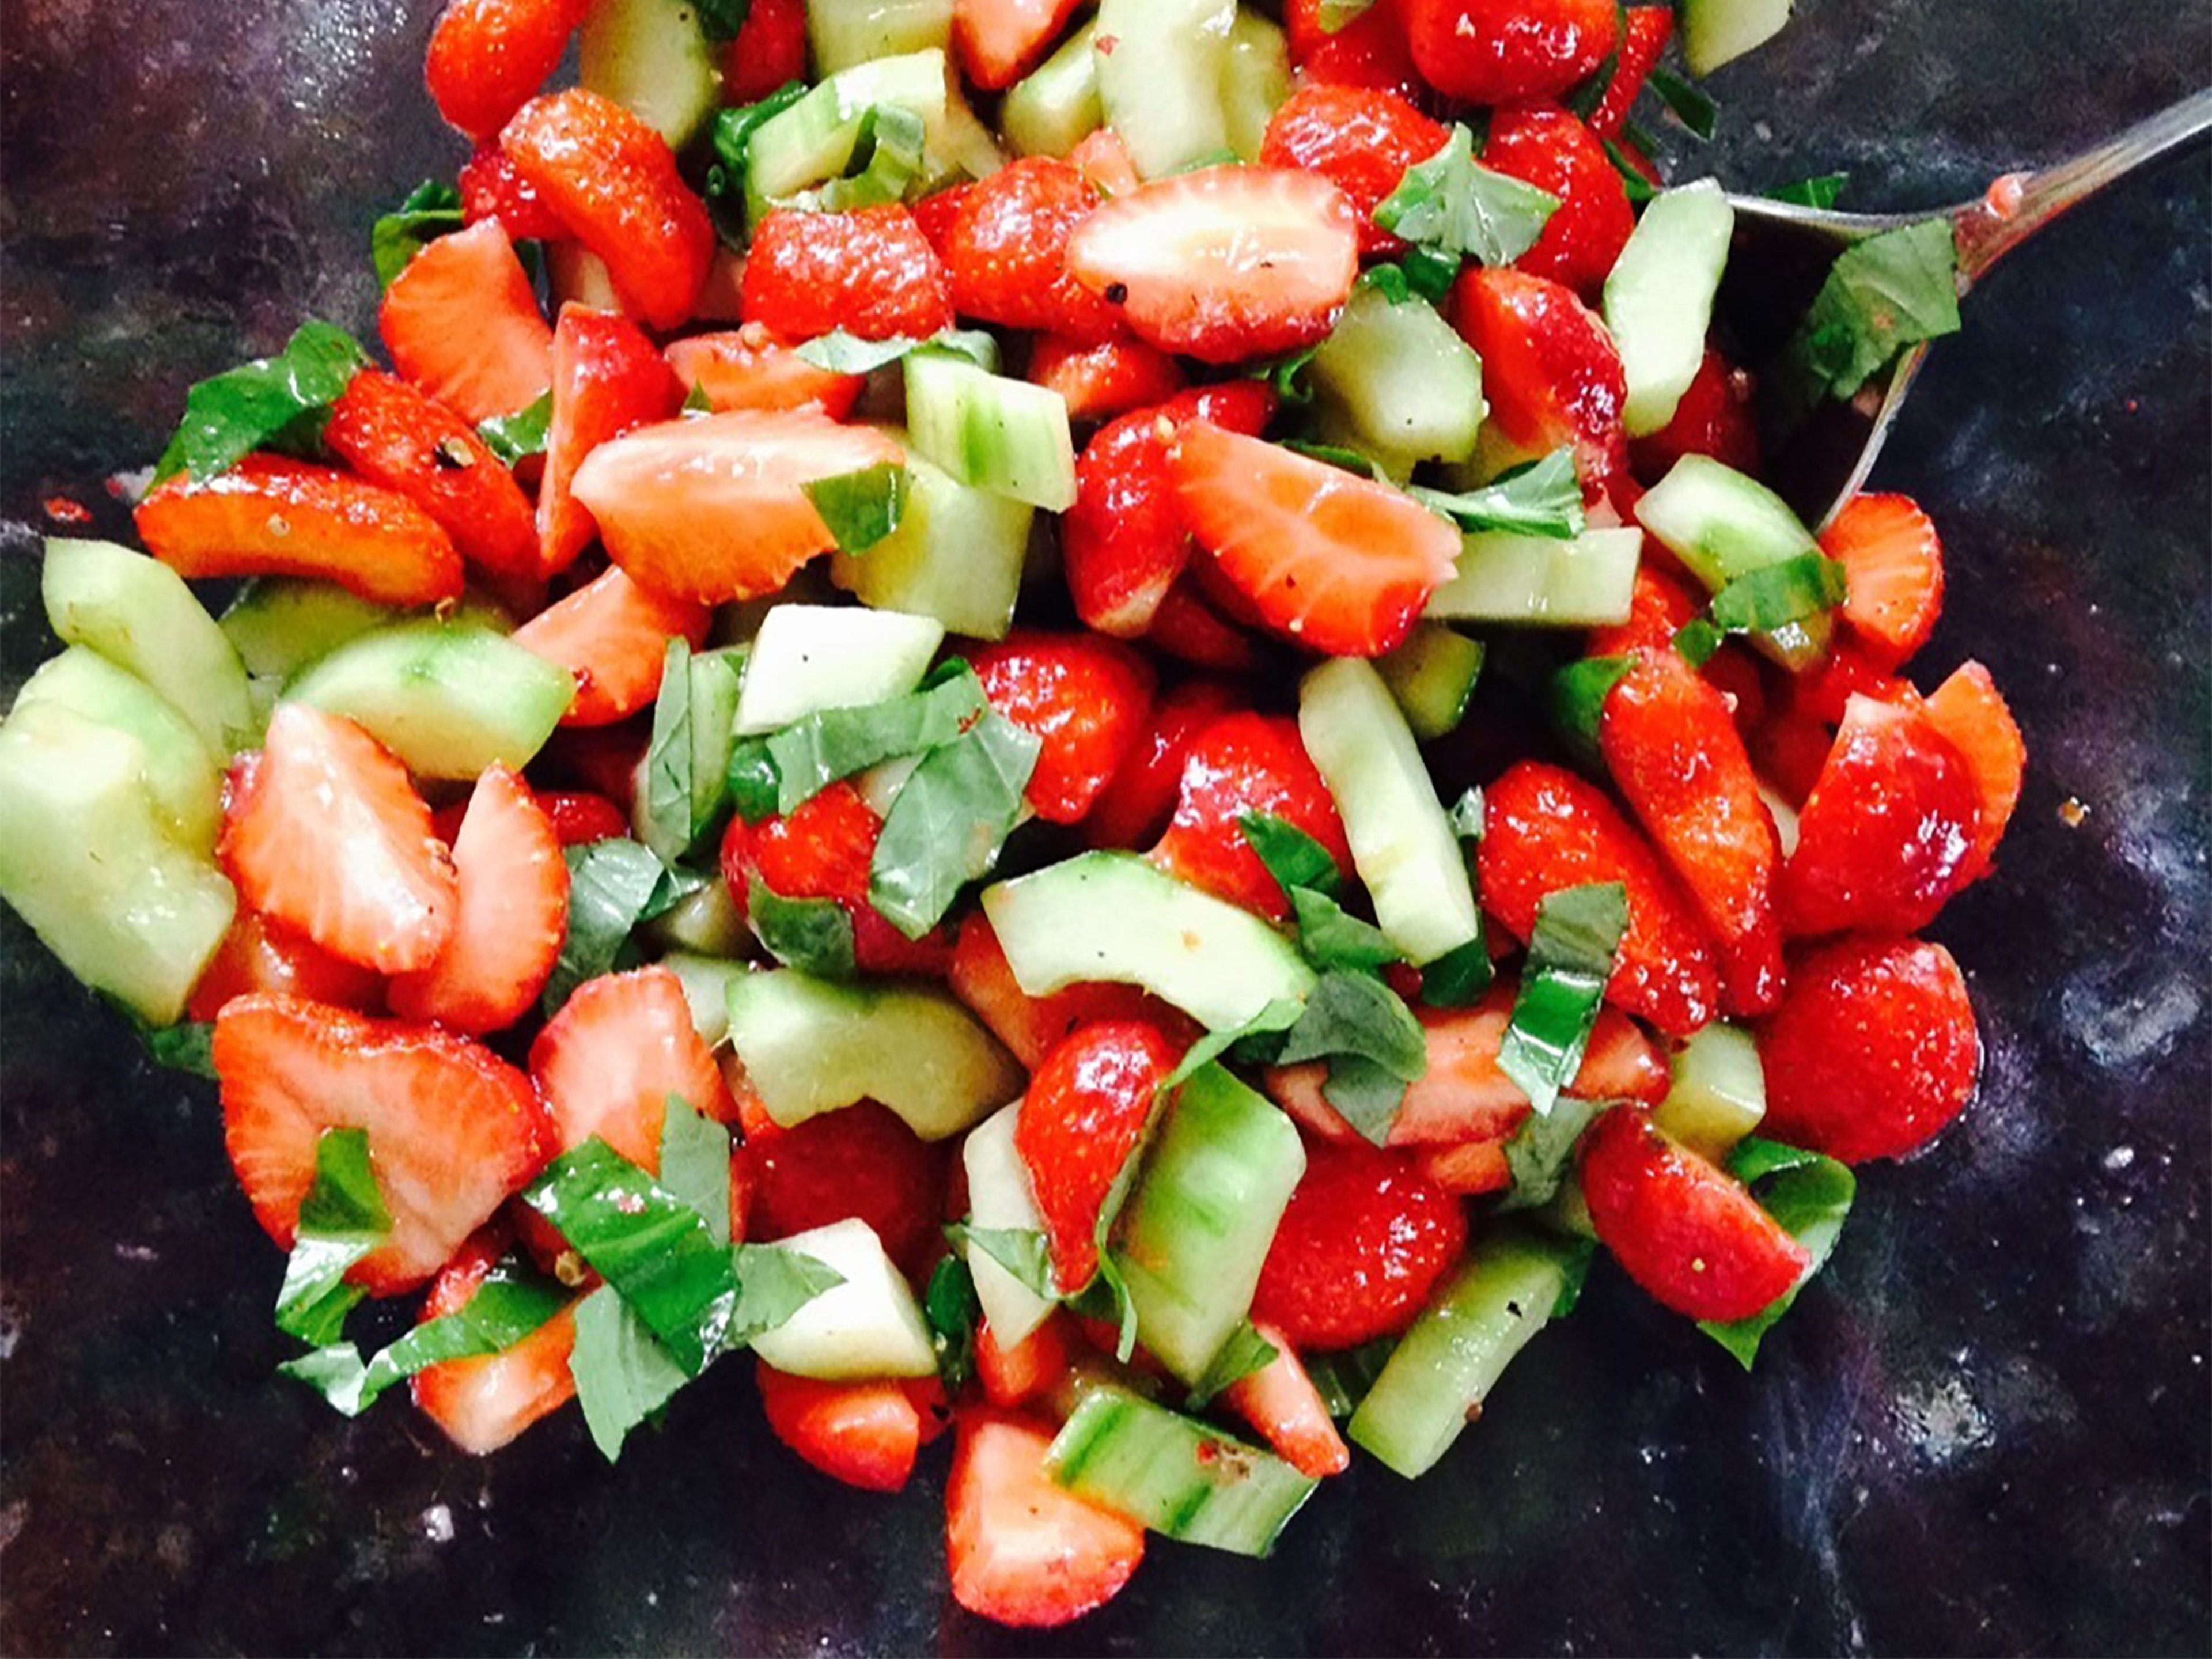 Strawberry and cucumber salad